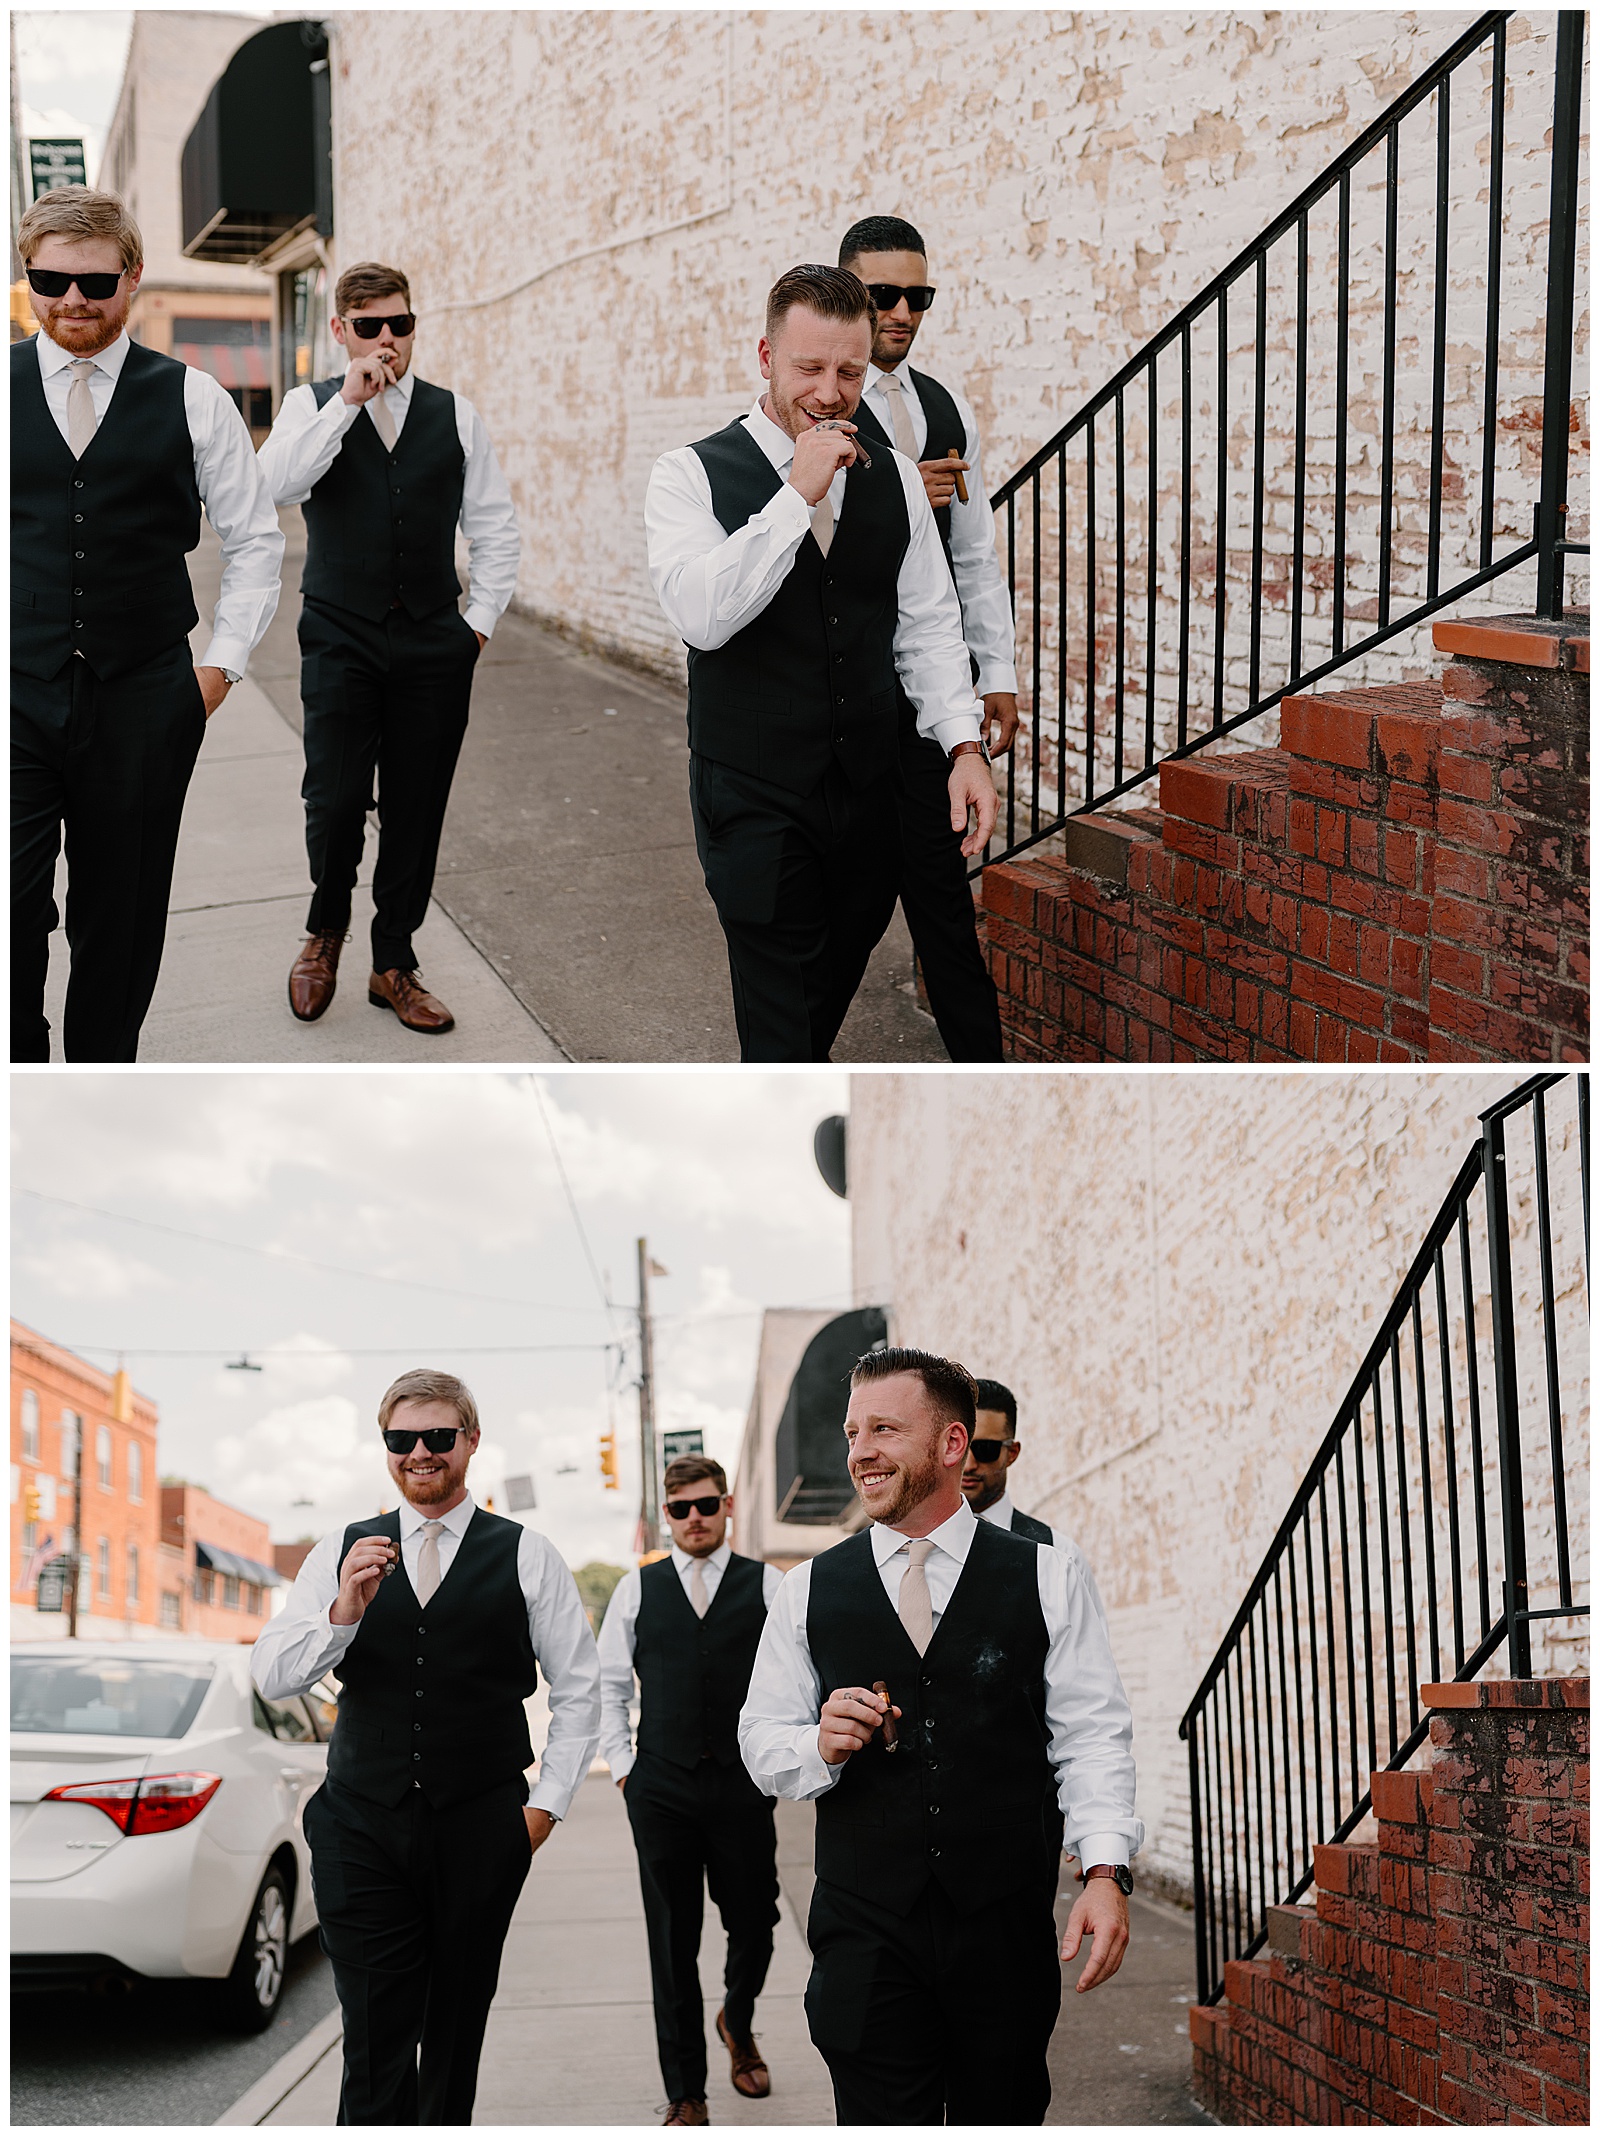 Groom and groomsmen smoking cigars at old downtown venue